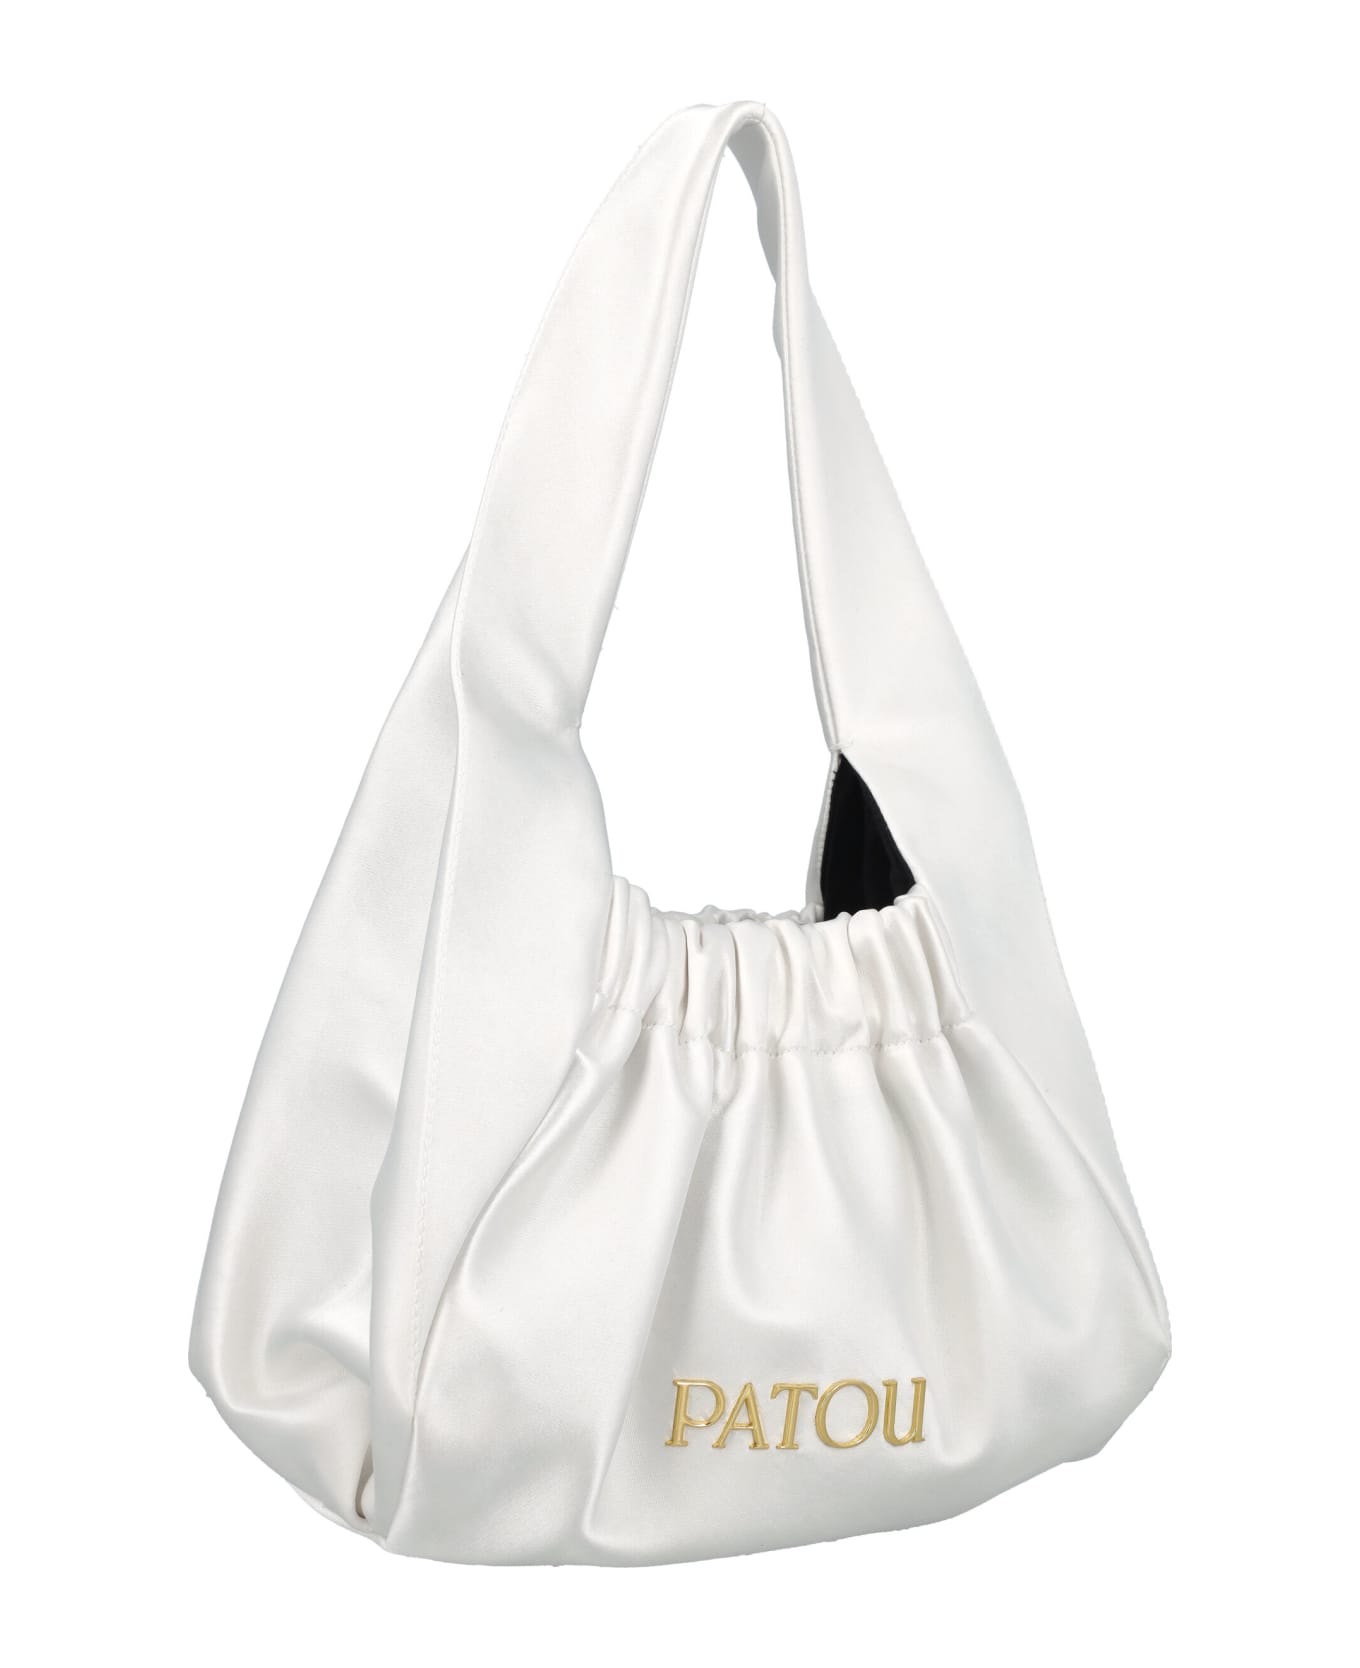 Patou Le Biscuit Bag - WHITE トートバッグ